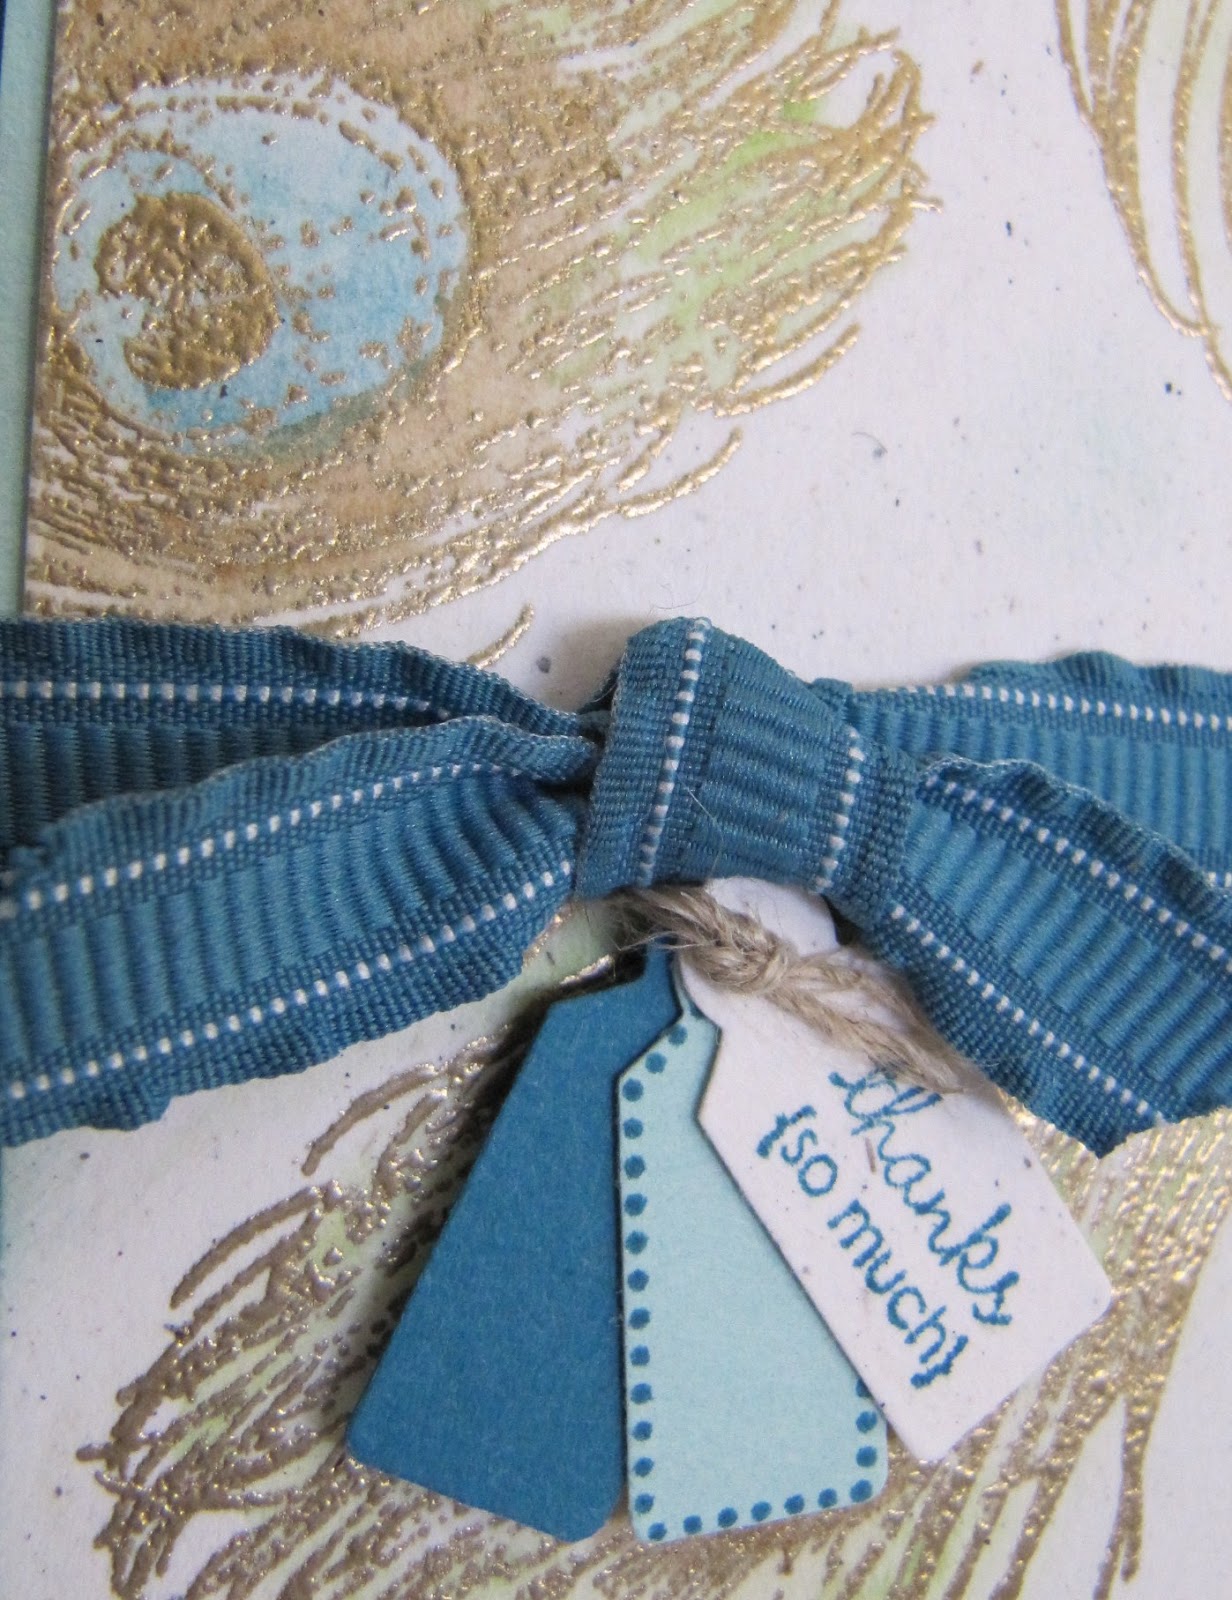 Here is a close-up of the embossed feathers and tags - aren't they ...